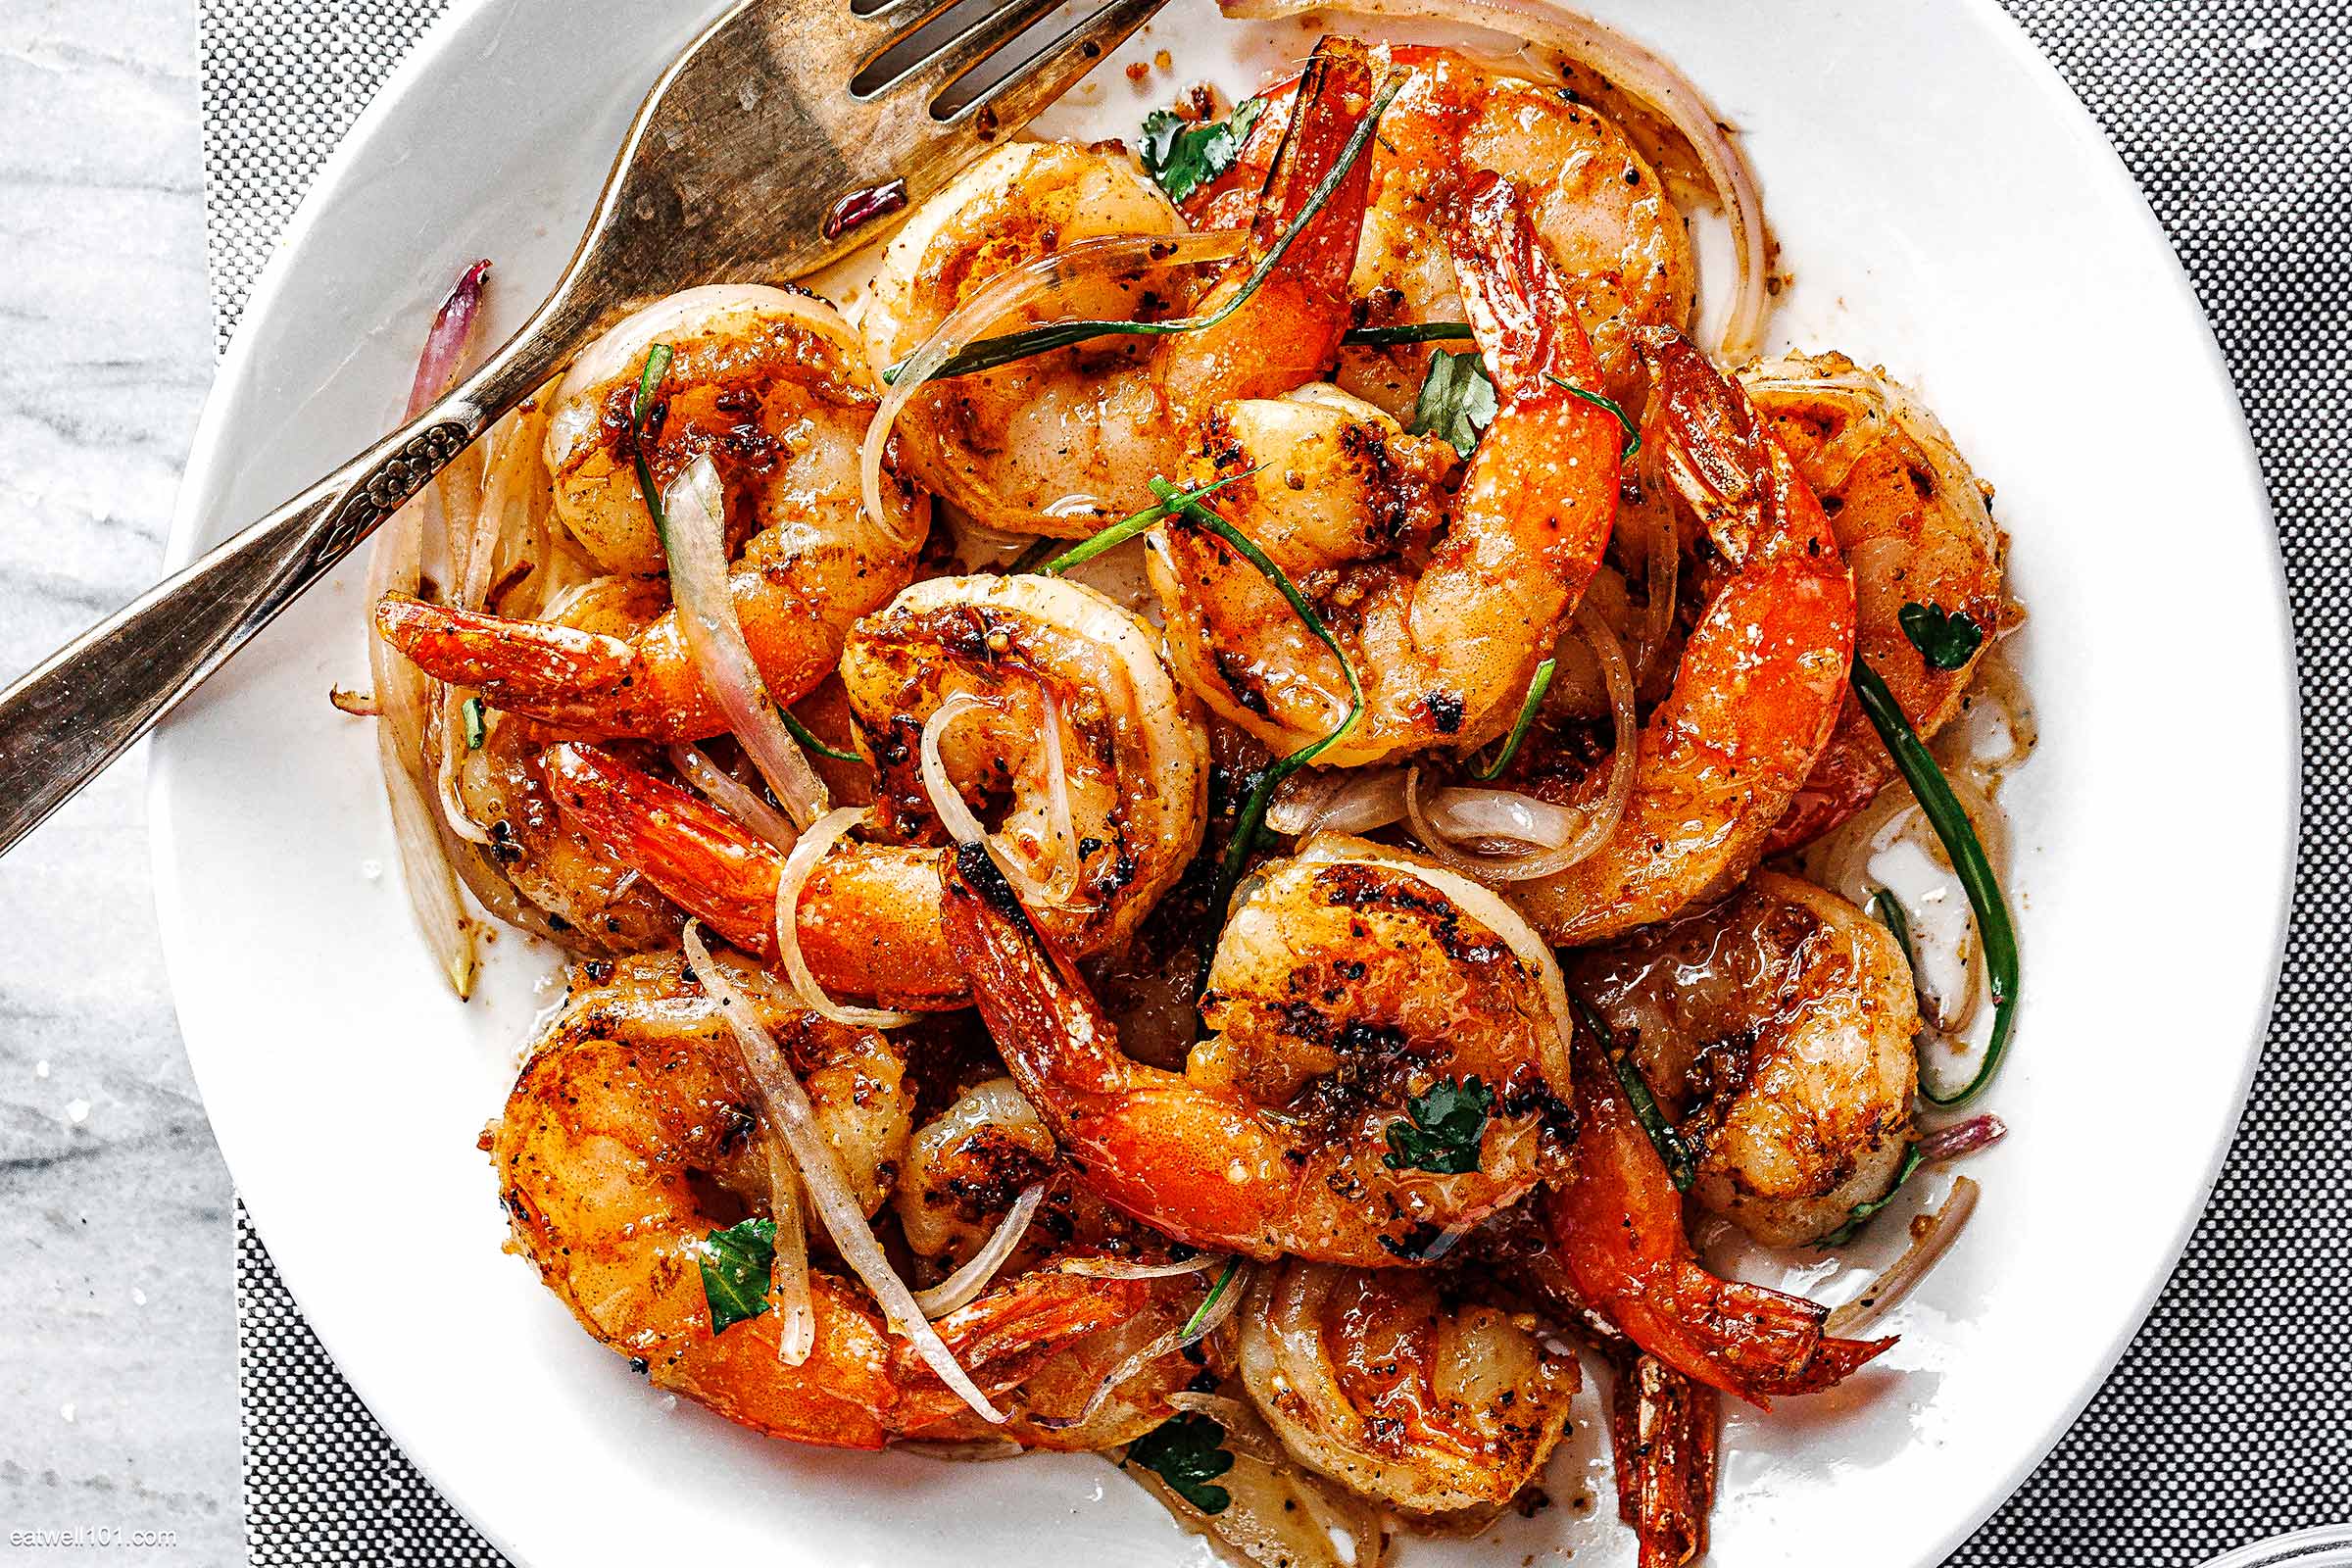 Grilled Shrimp and Shallots